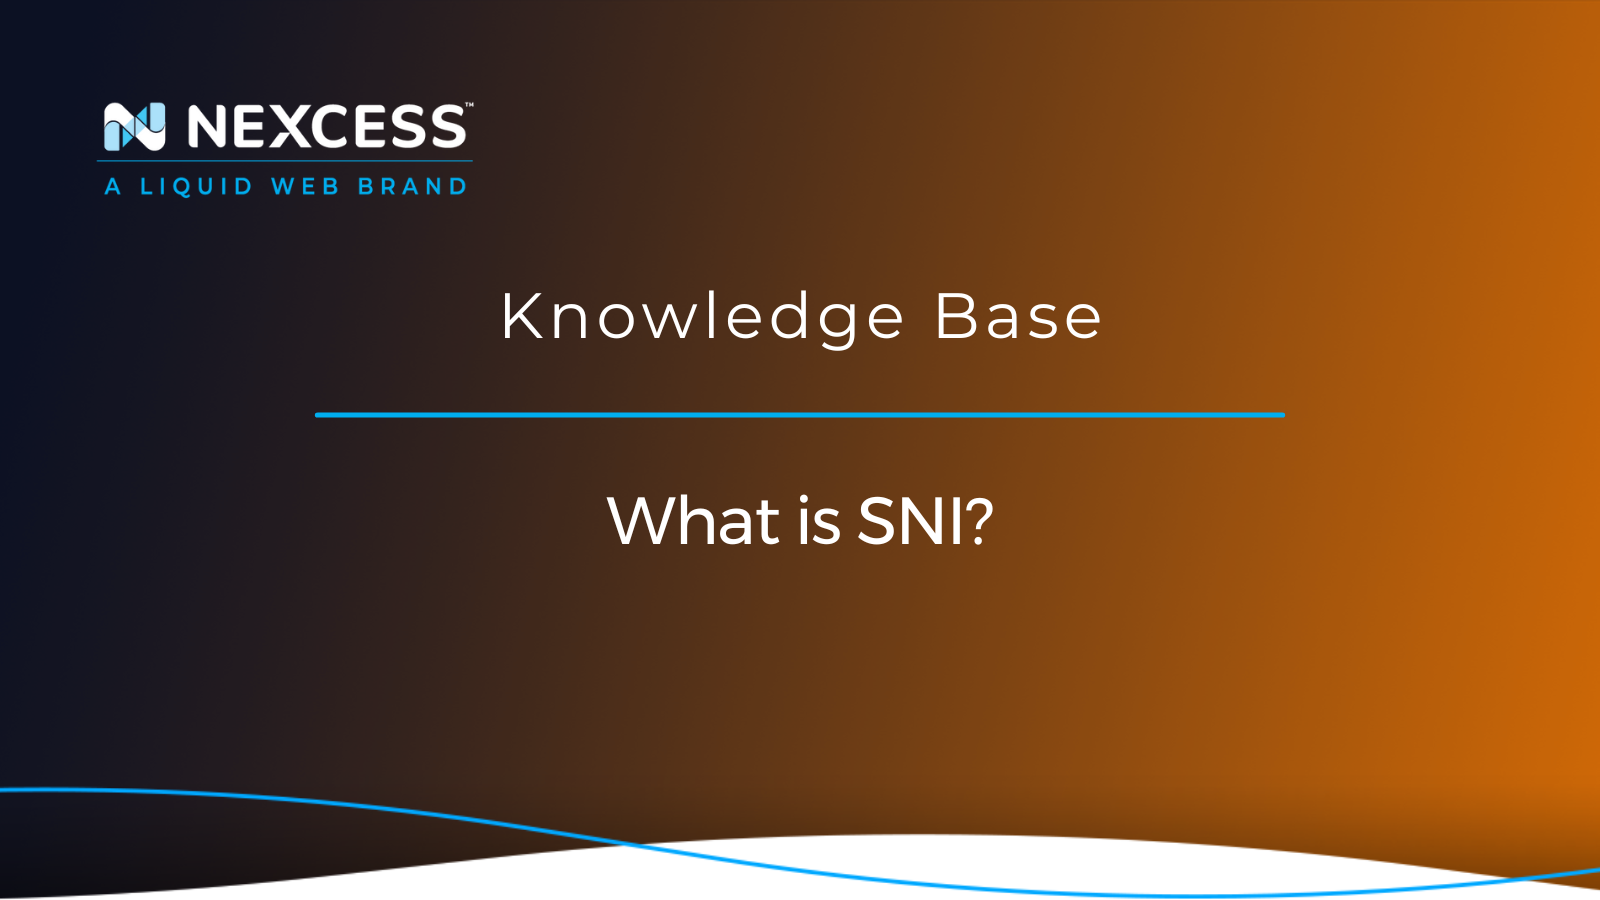 What is SNI?